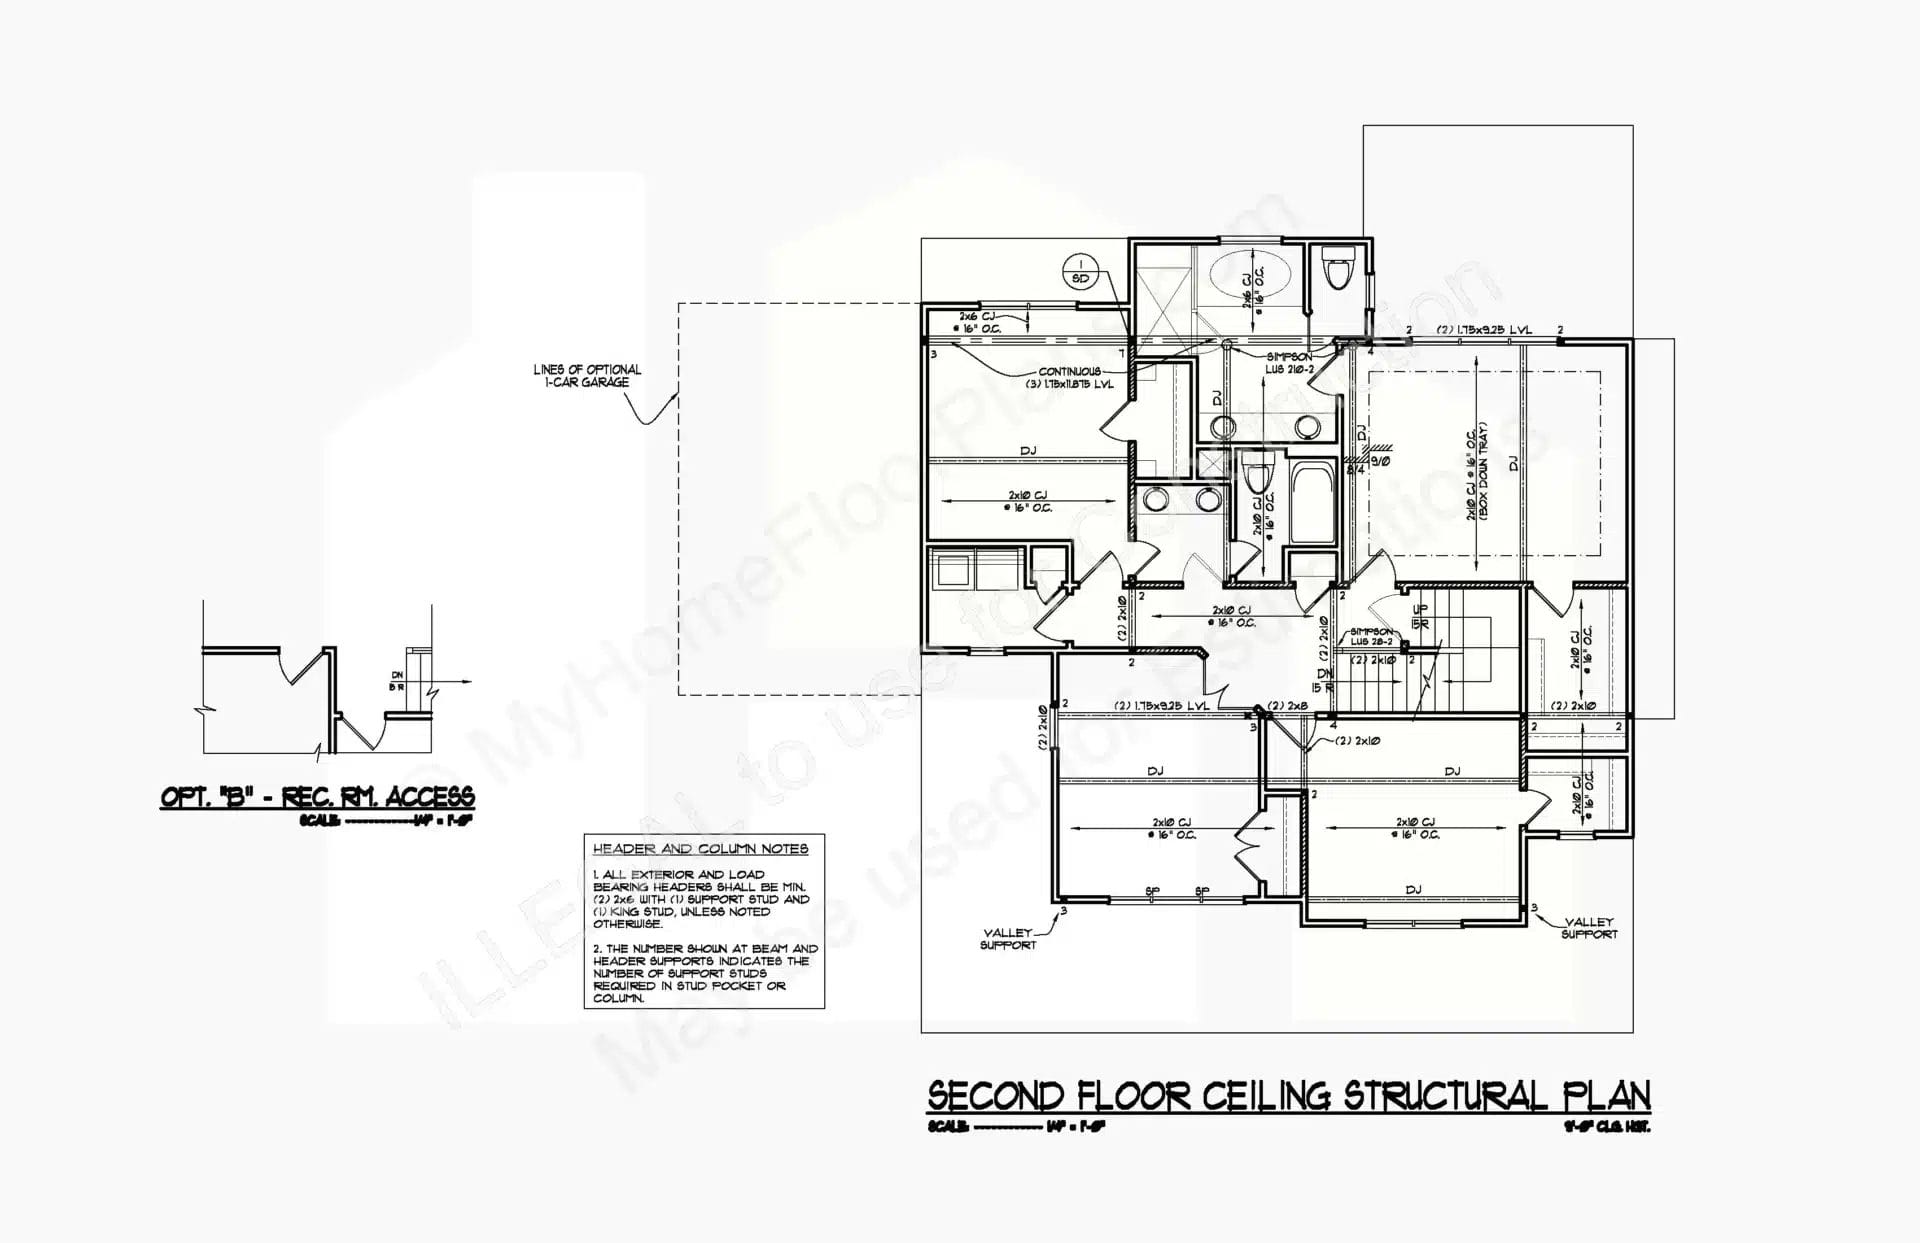 This image is a detailed architectural design of a 13-1790 ceiling structural plan, showcasing various sections and components, labeled with technical specifications and measurements.